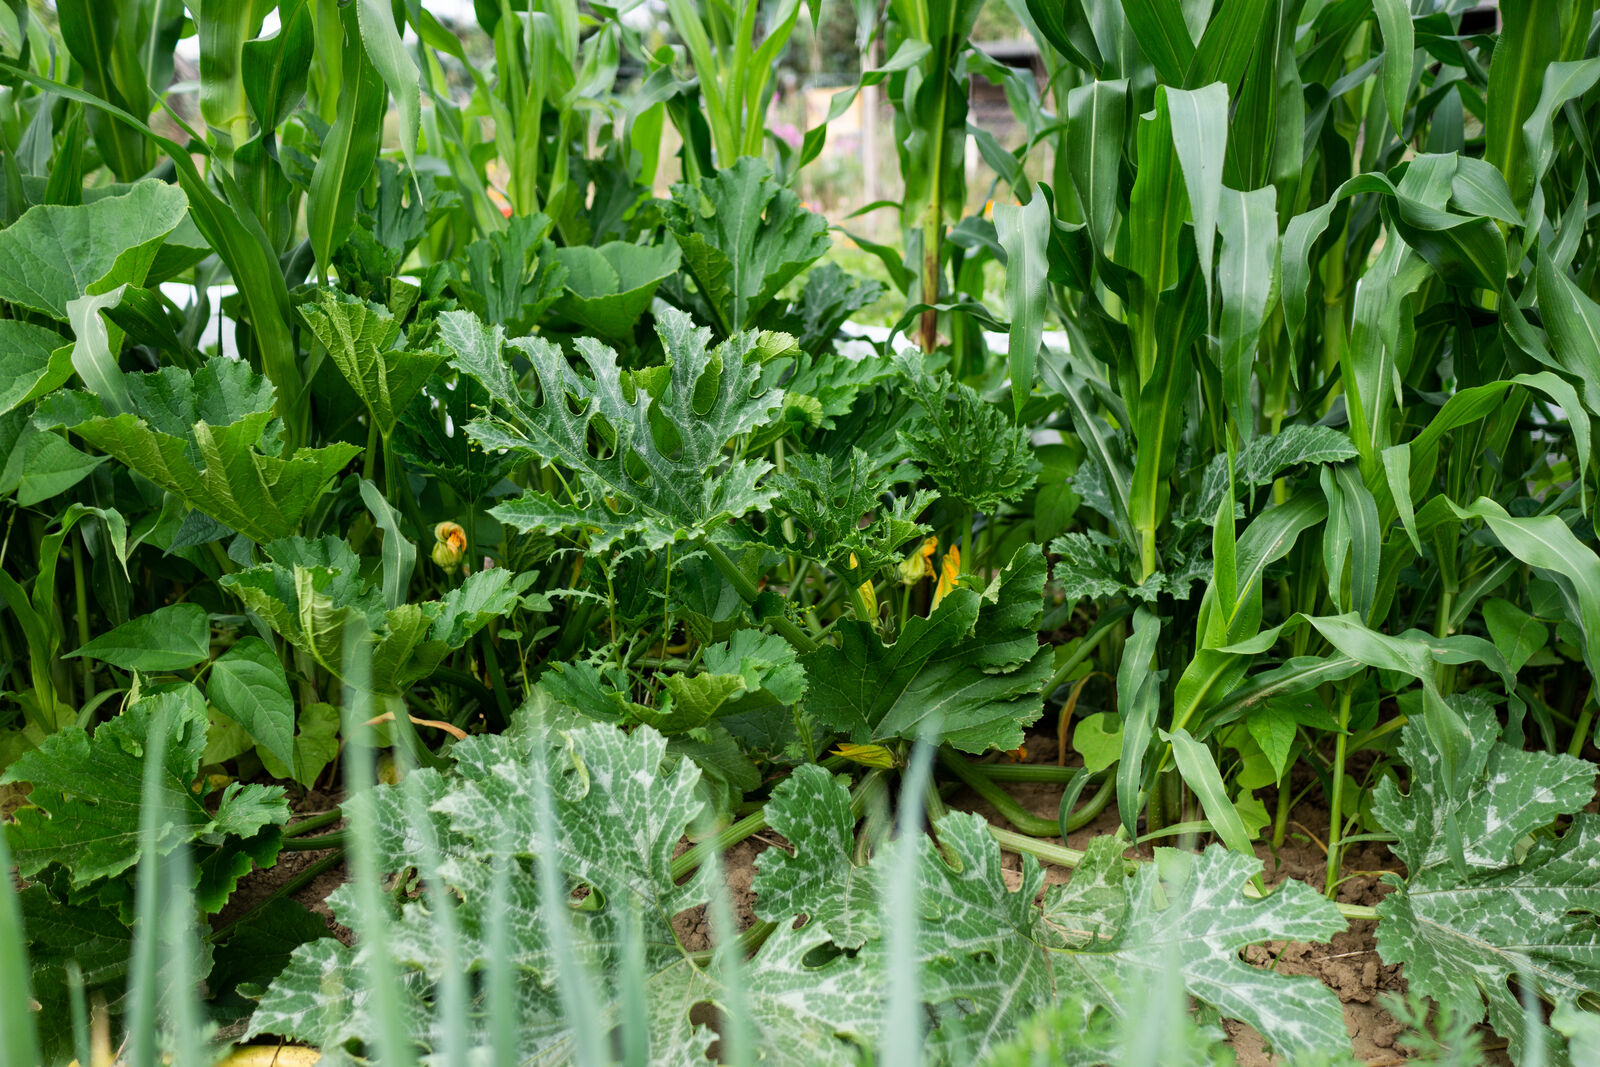 Zucchinis in the milpa together with corn and beans